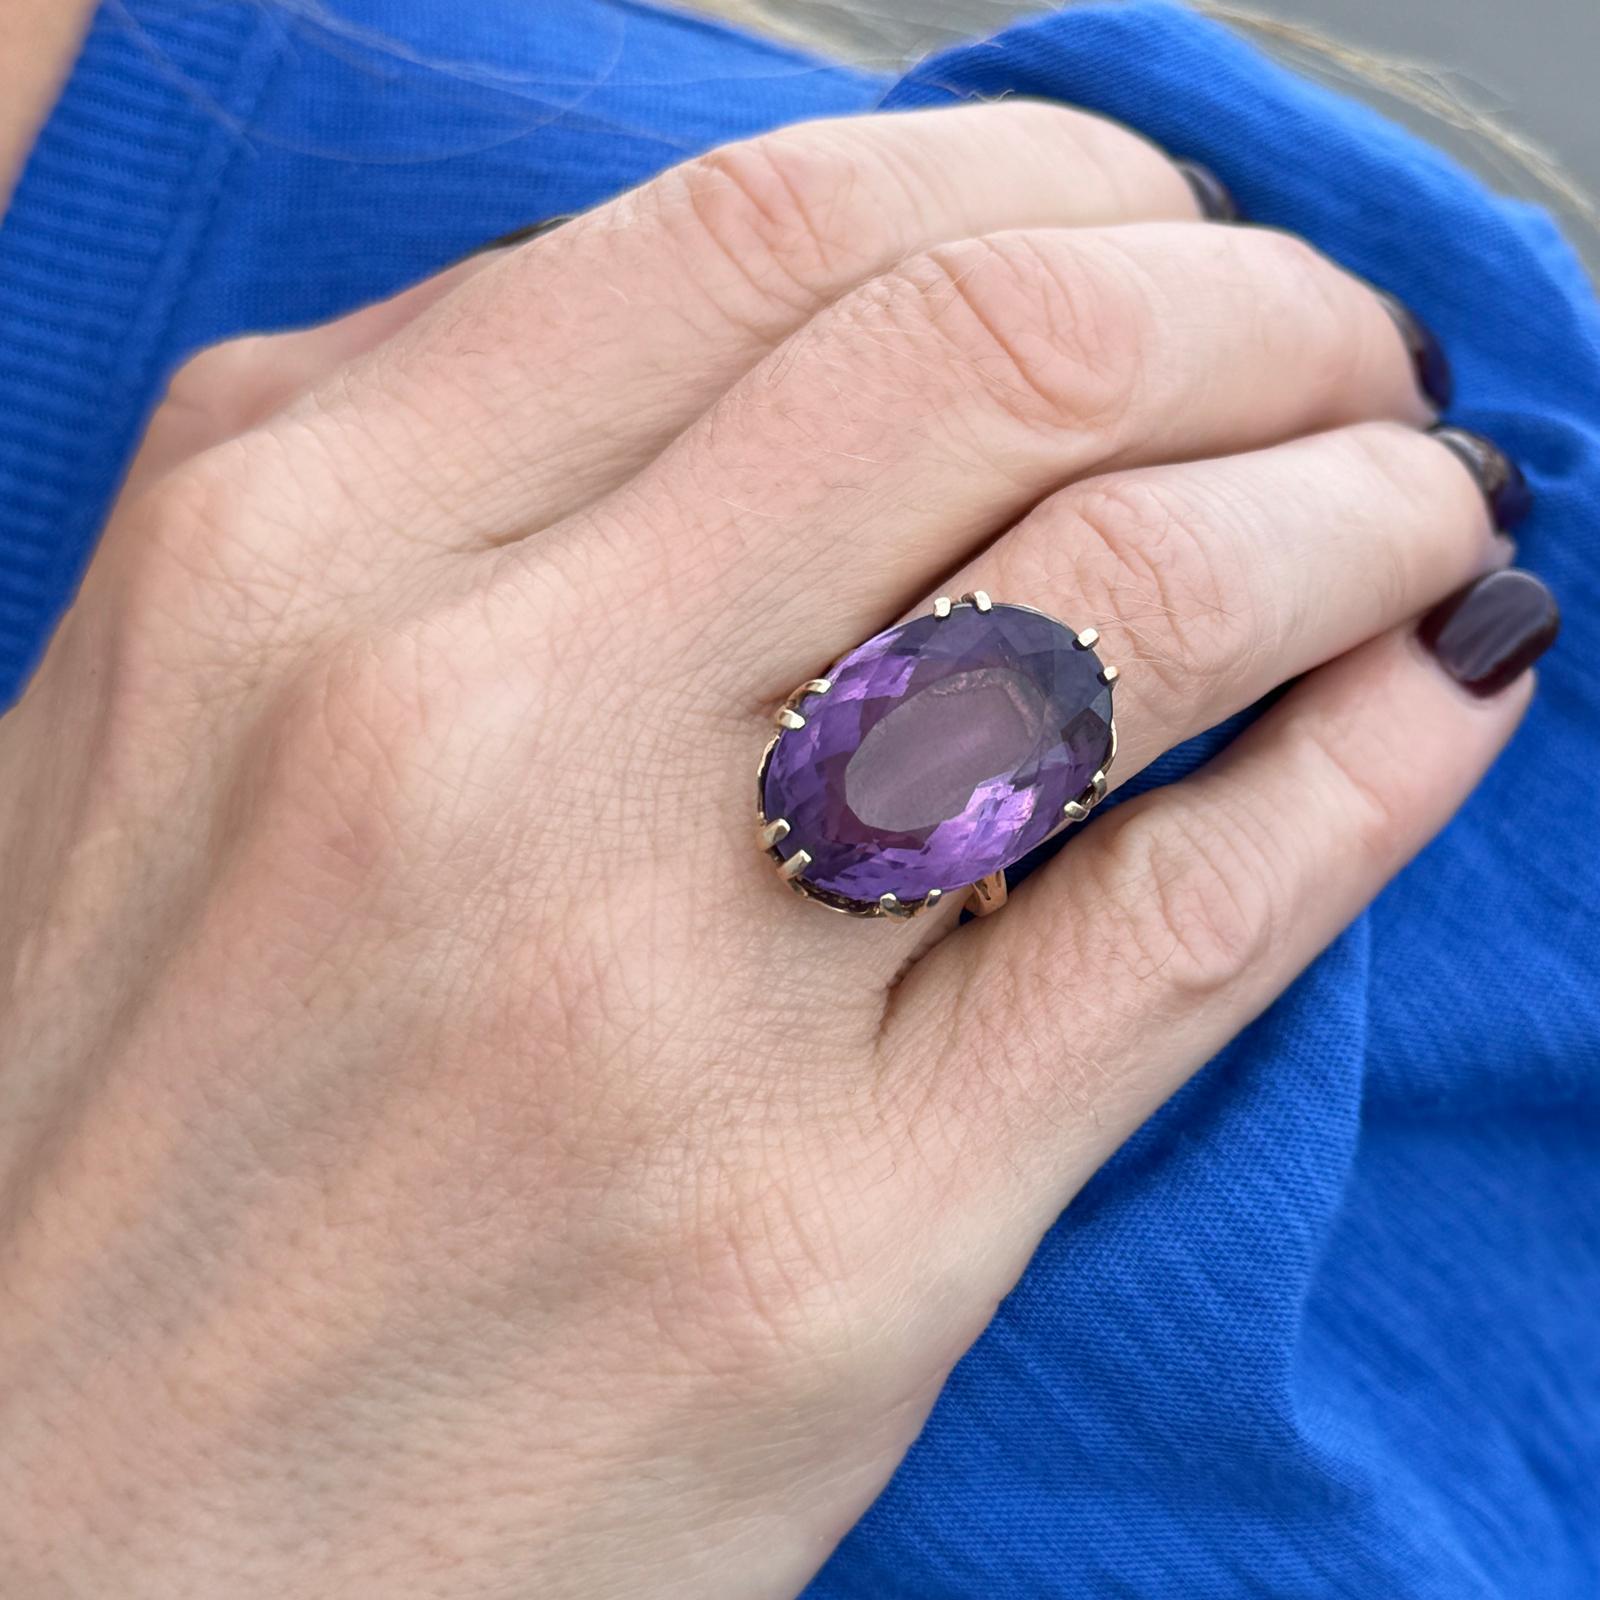 Vintage oval amethyst estate ring handcrafted in 14 karat yellow gold. The ring features an oval faceted amethyst gemstone weighing approximately 18 carats (by measurements) set in a beautifully crafted vintage mounting. The ring is currently size